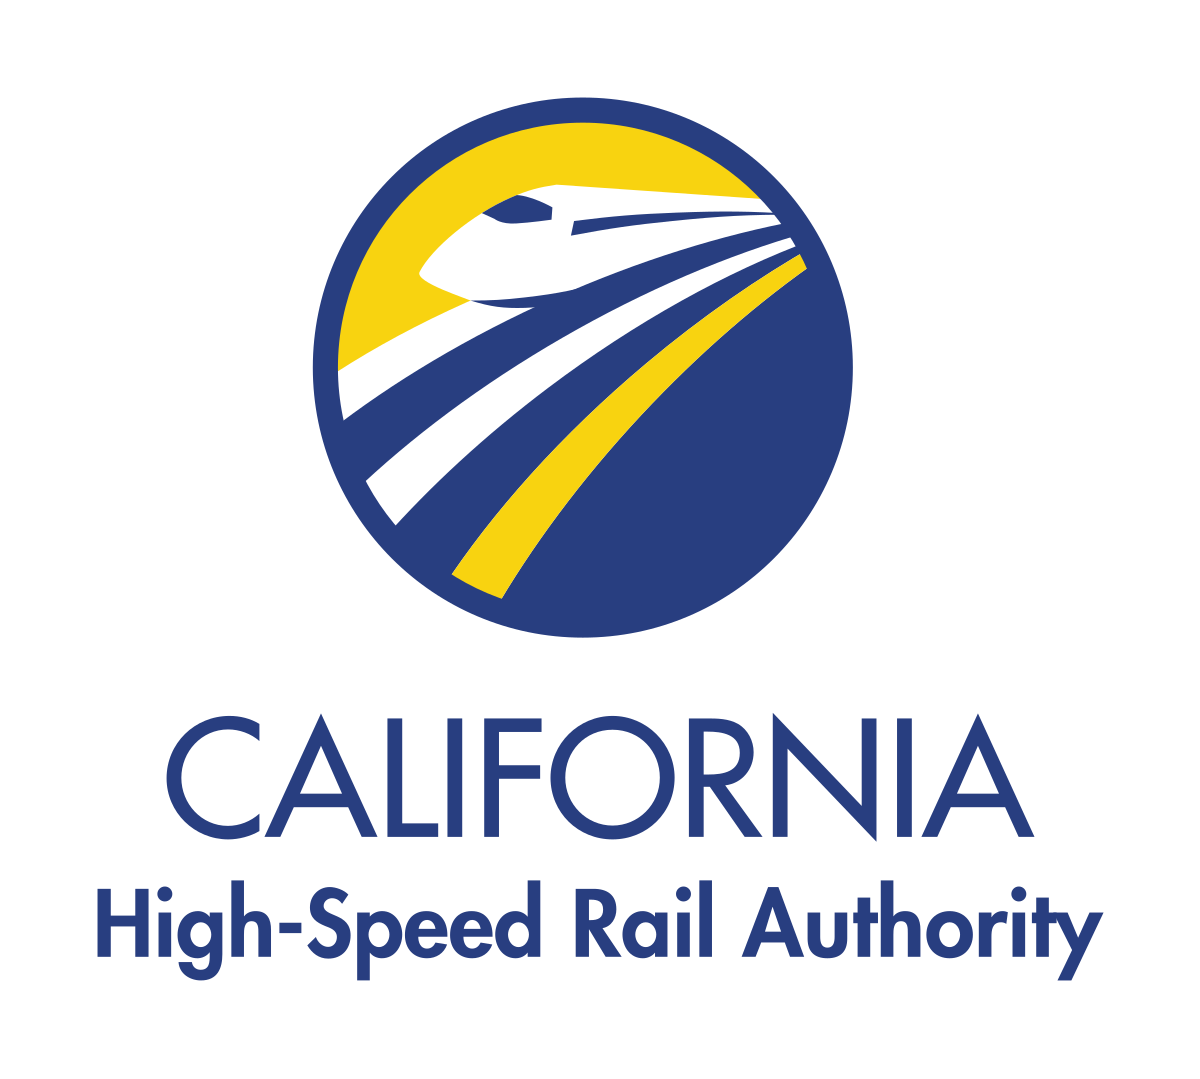 California High Speed Rail Authority attending the Rail Live conference and exhibition event in Madrid, Spain